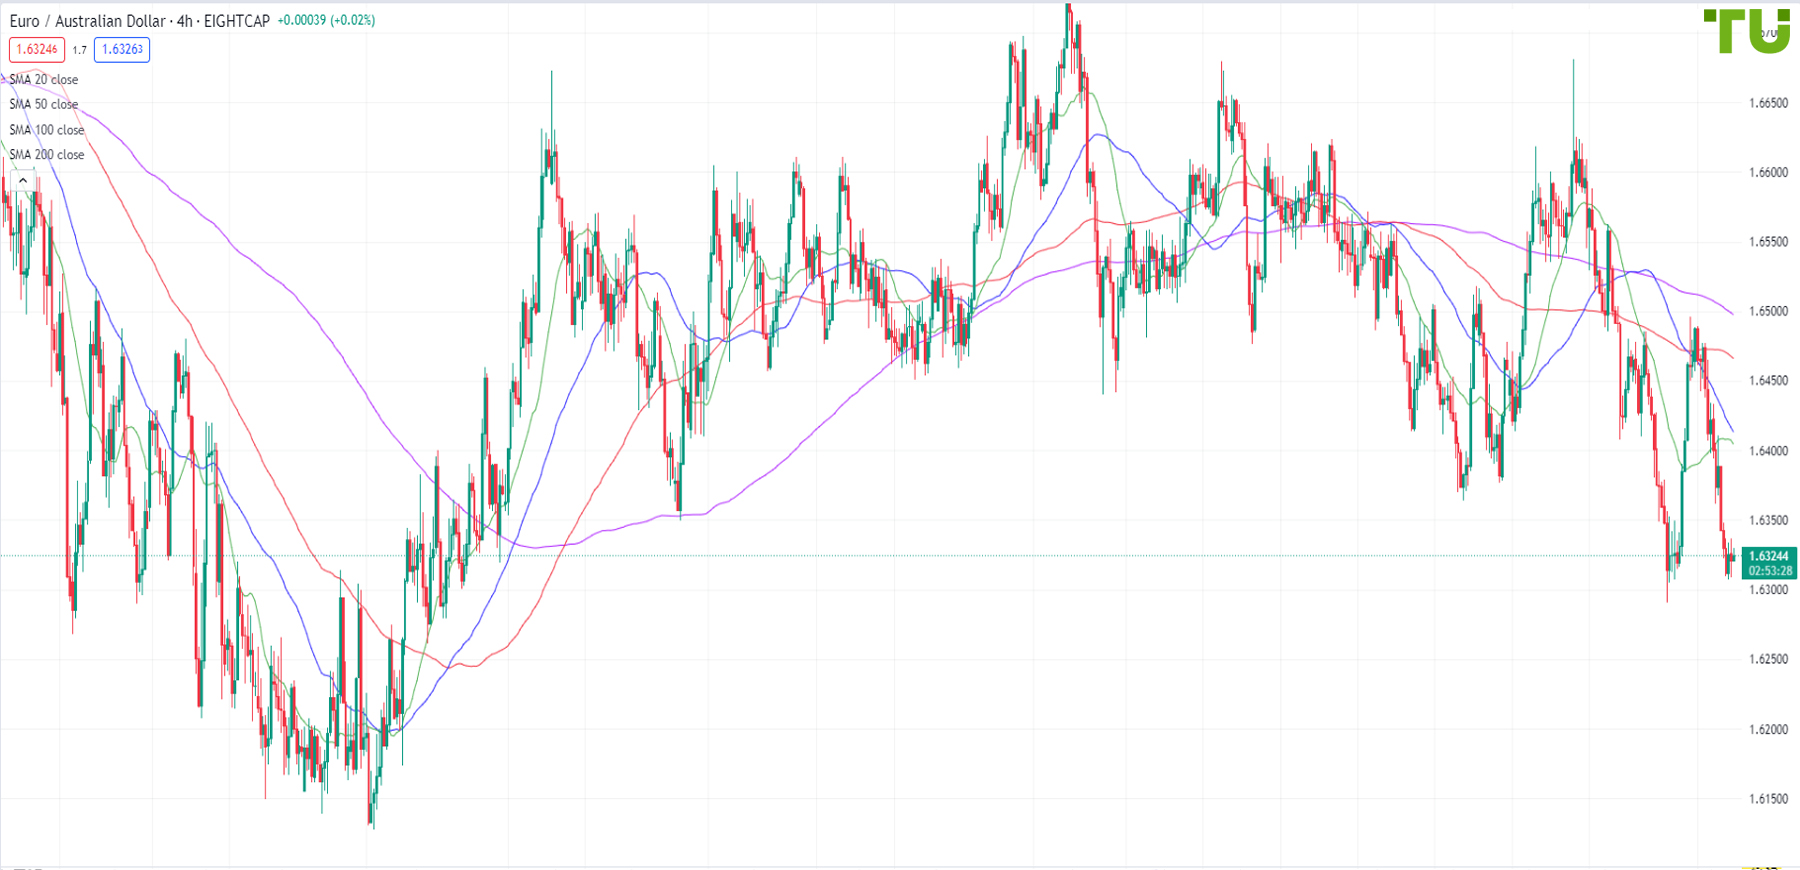 EUR/AUD returned to 1.6310 support